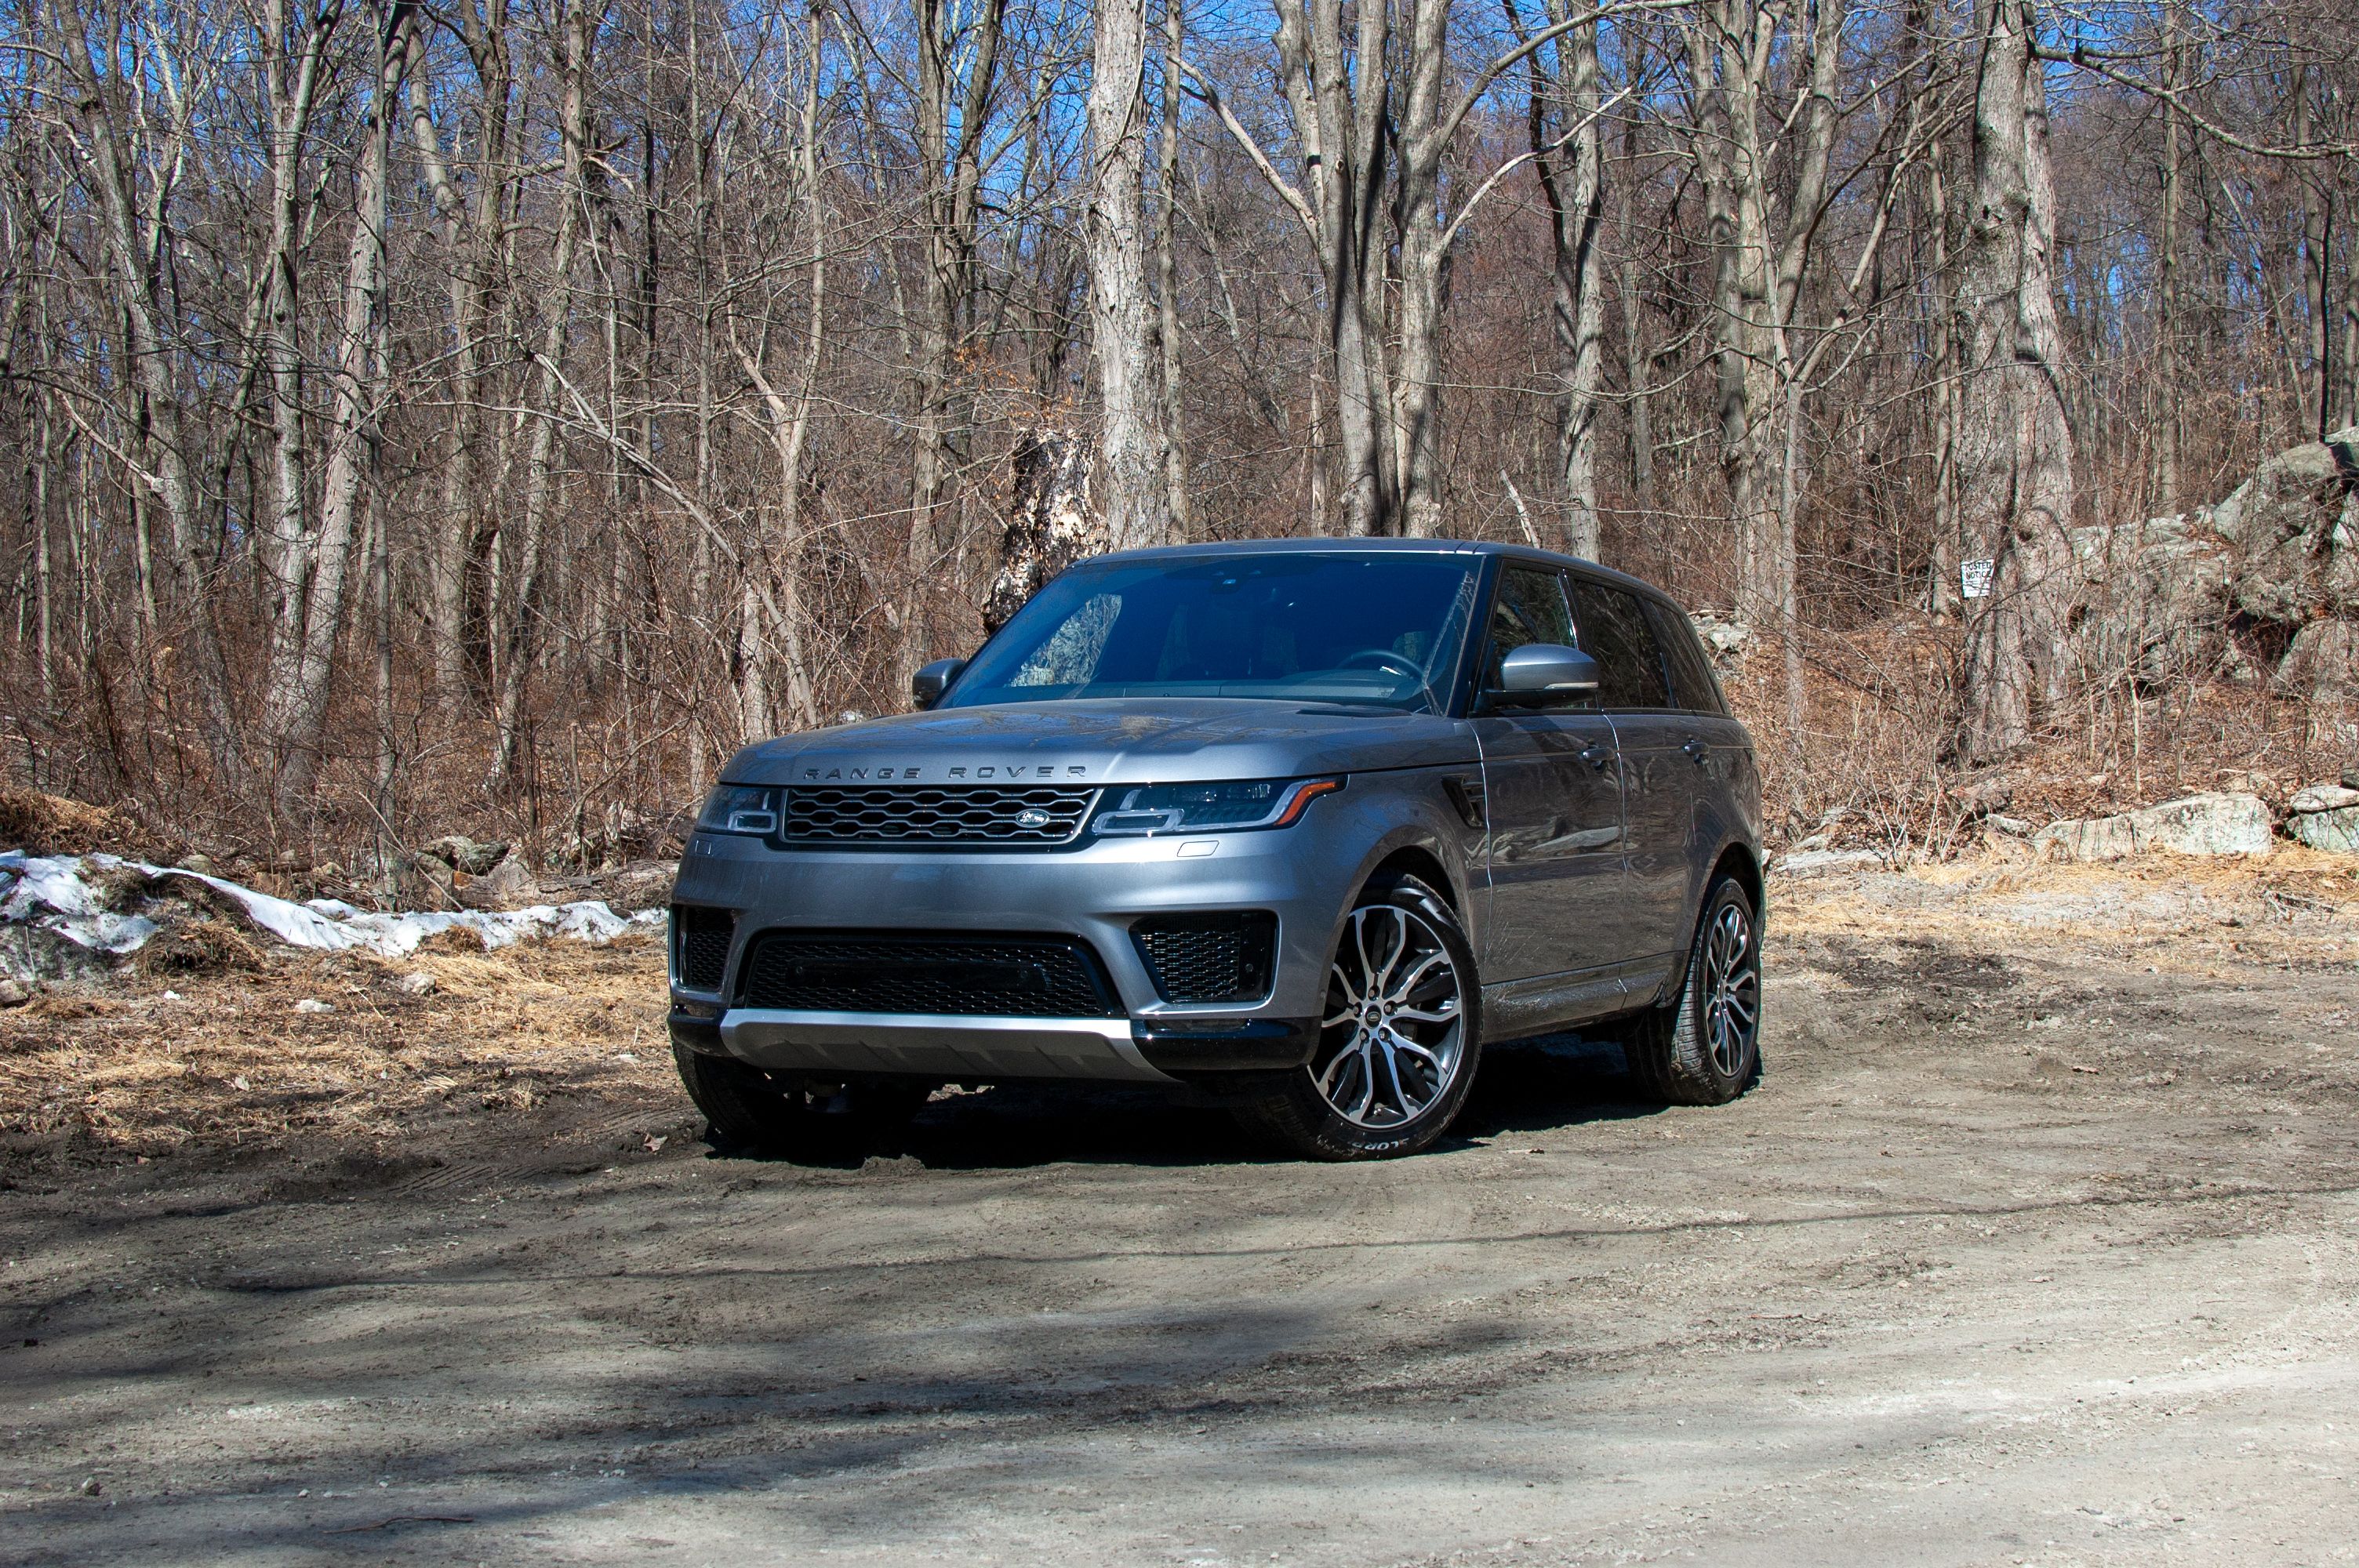 Used 2021 Land Rover Range Rover Sport for Sale (with Photos) - CarGurus